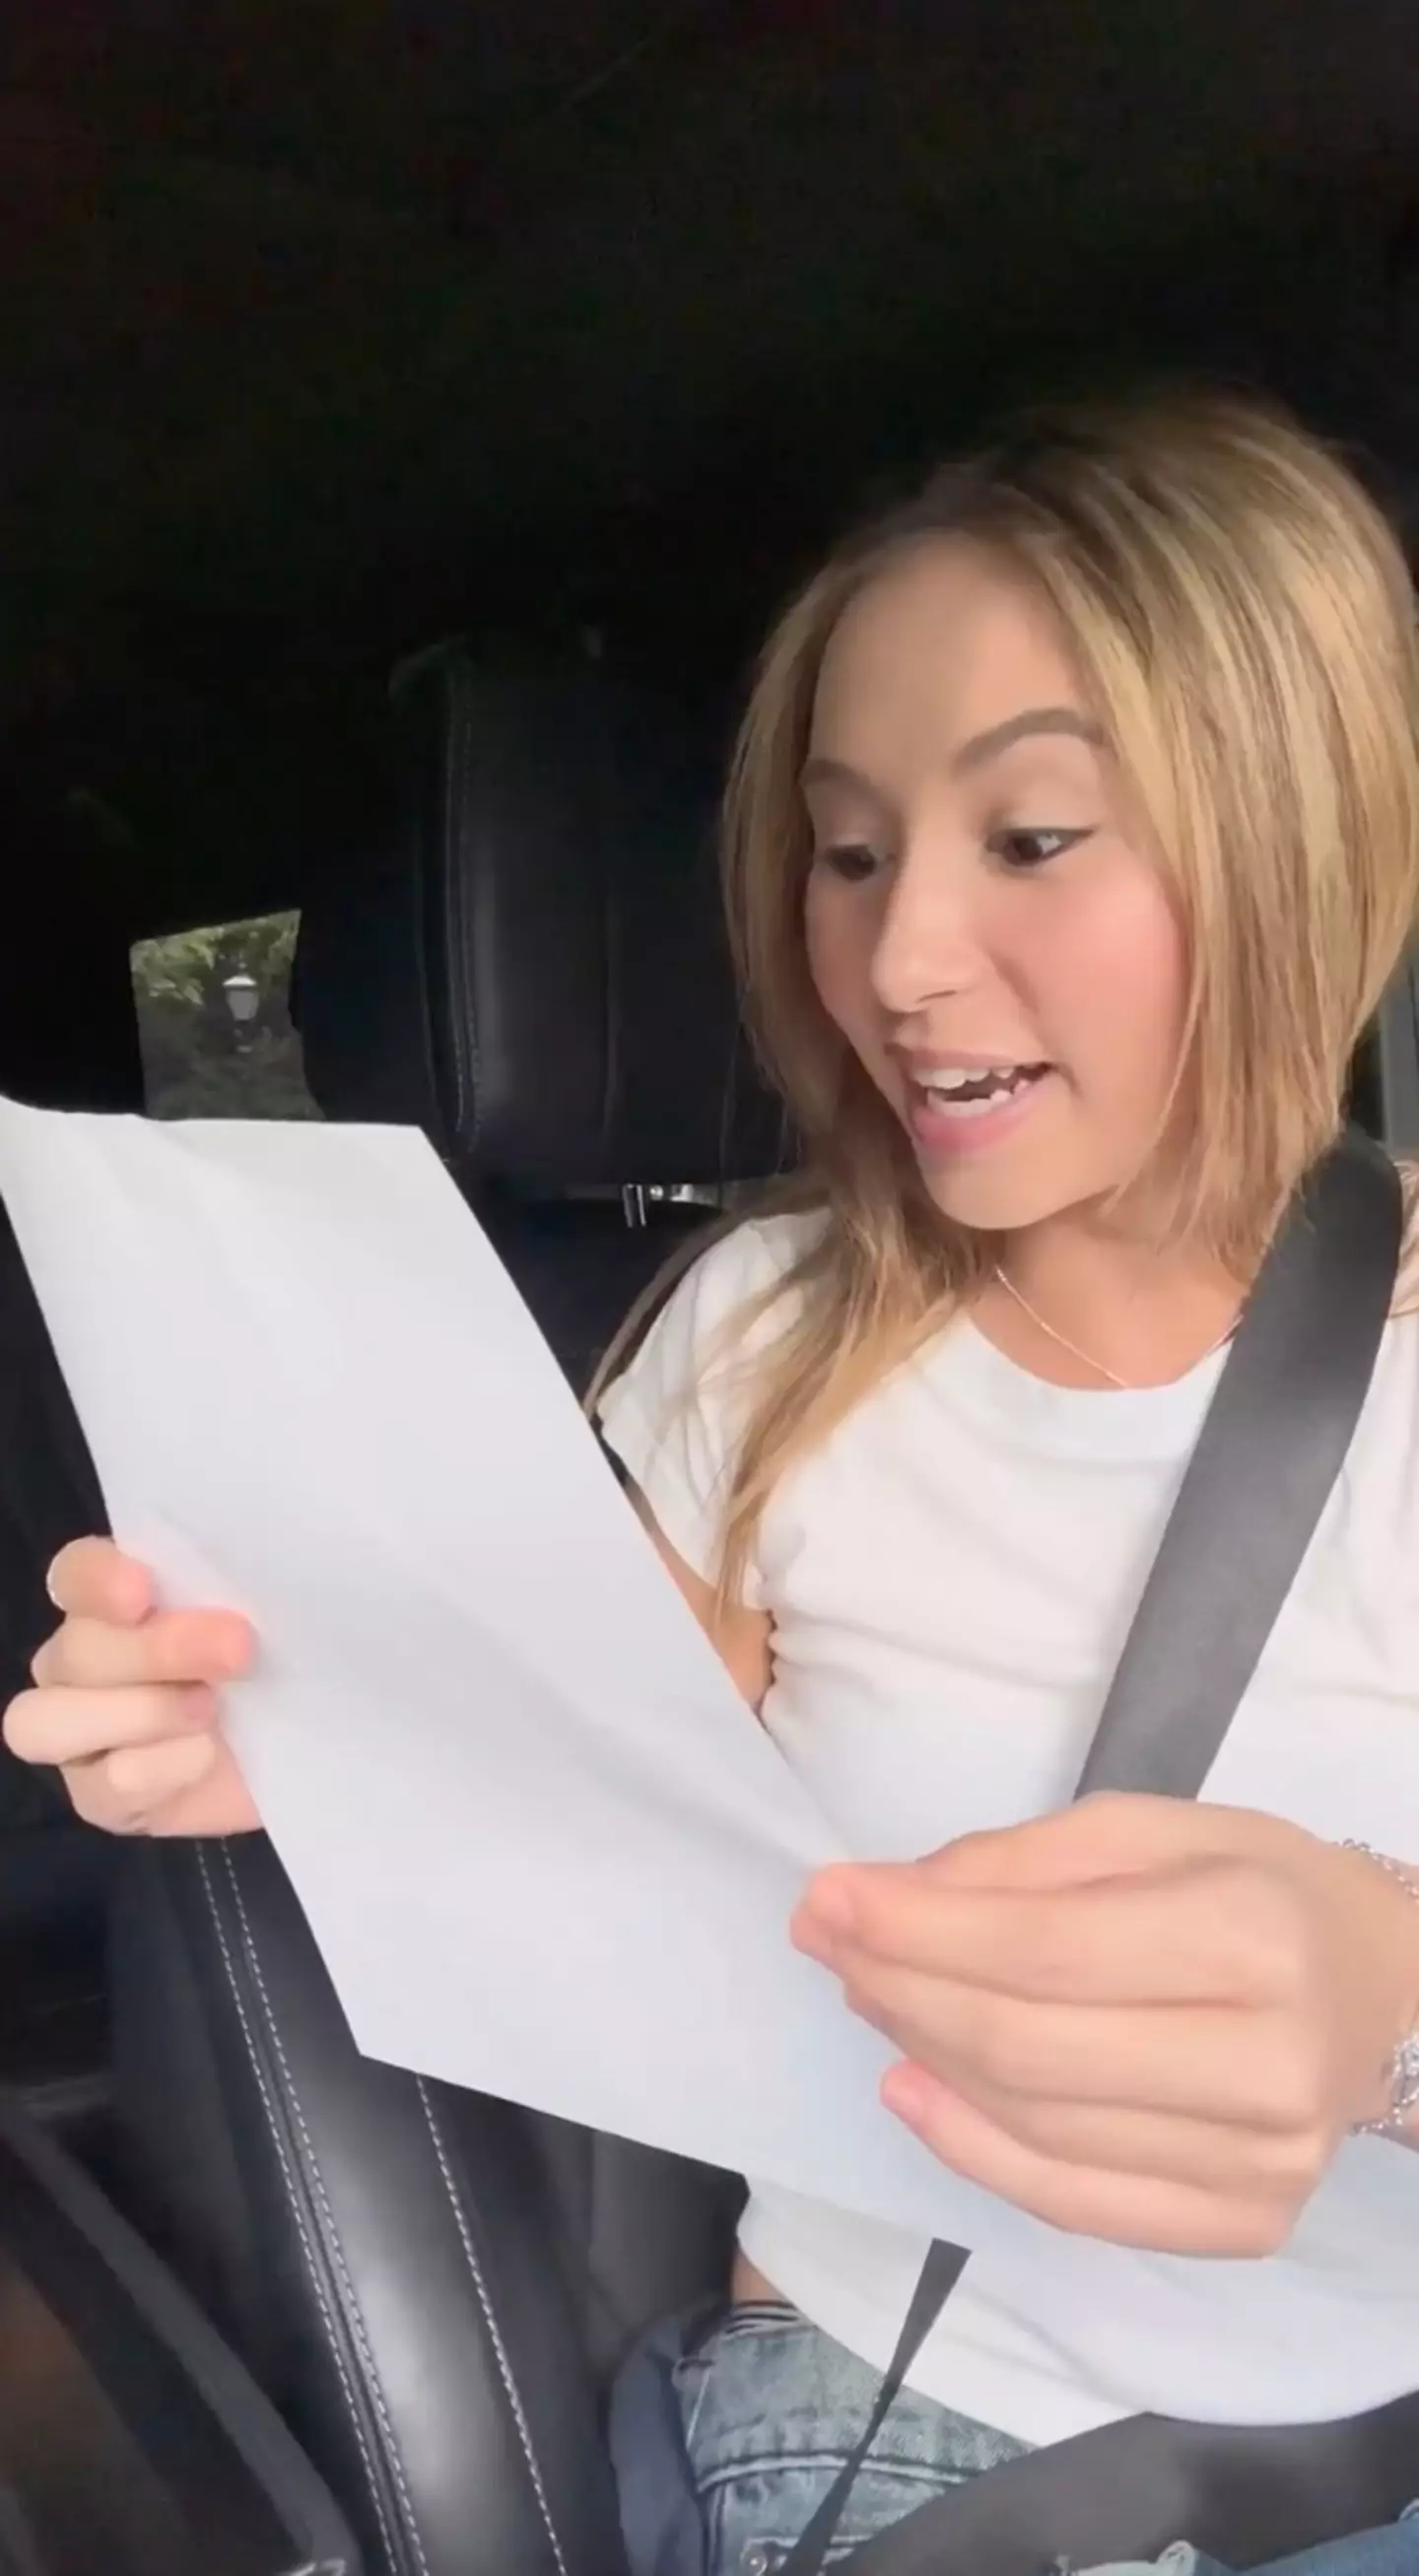 Myleene Klass started 'ugly crying' after sharing a heartwarming video of her daughter Ava receiving her GCSE results.